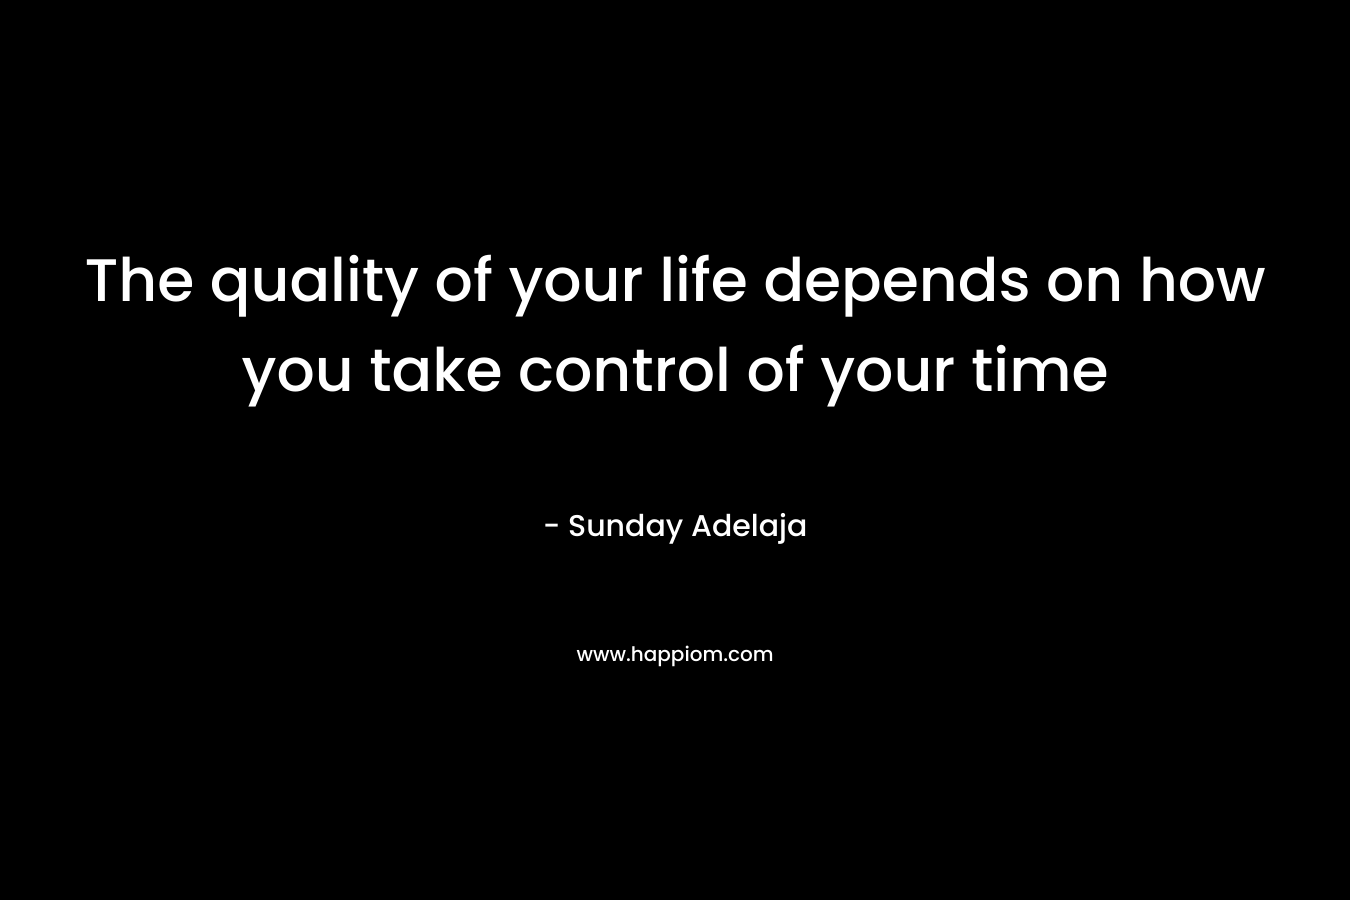 The quality of your life depends on how you take control of your time